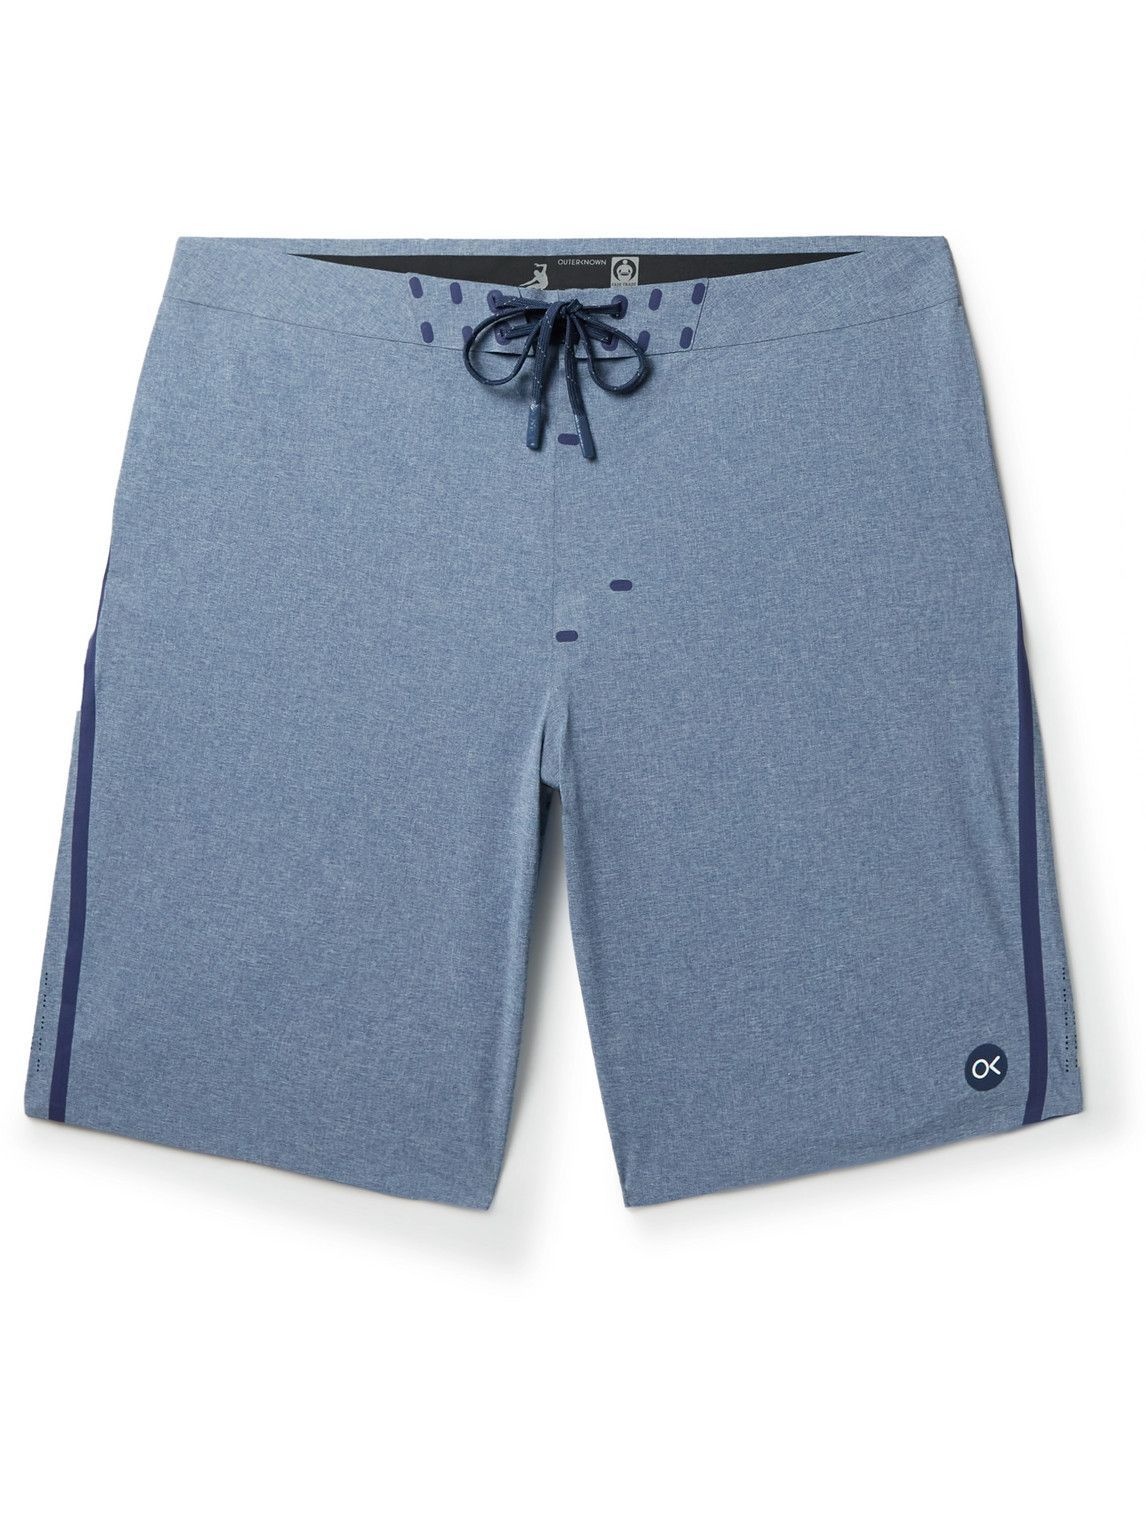 Outerknown - Apex Long-Length Swim Shorts - Blue Outerknown